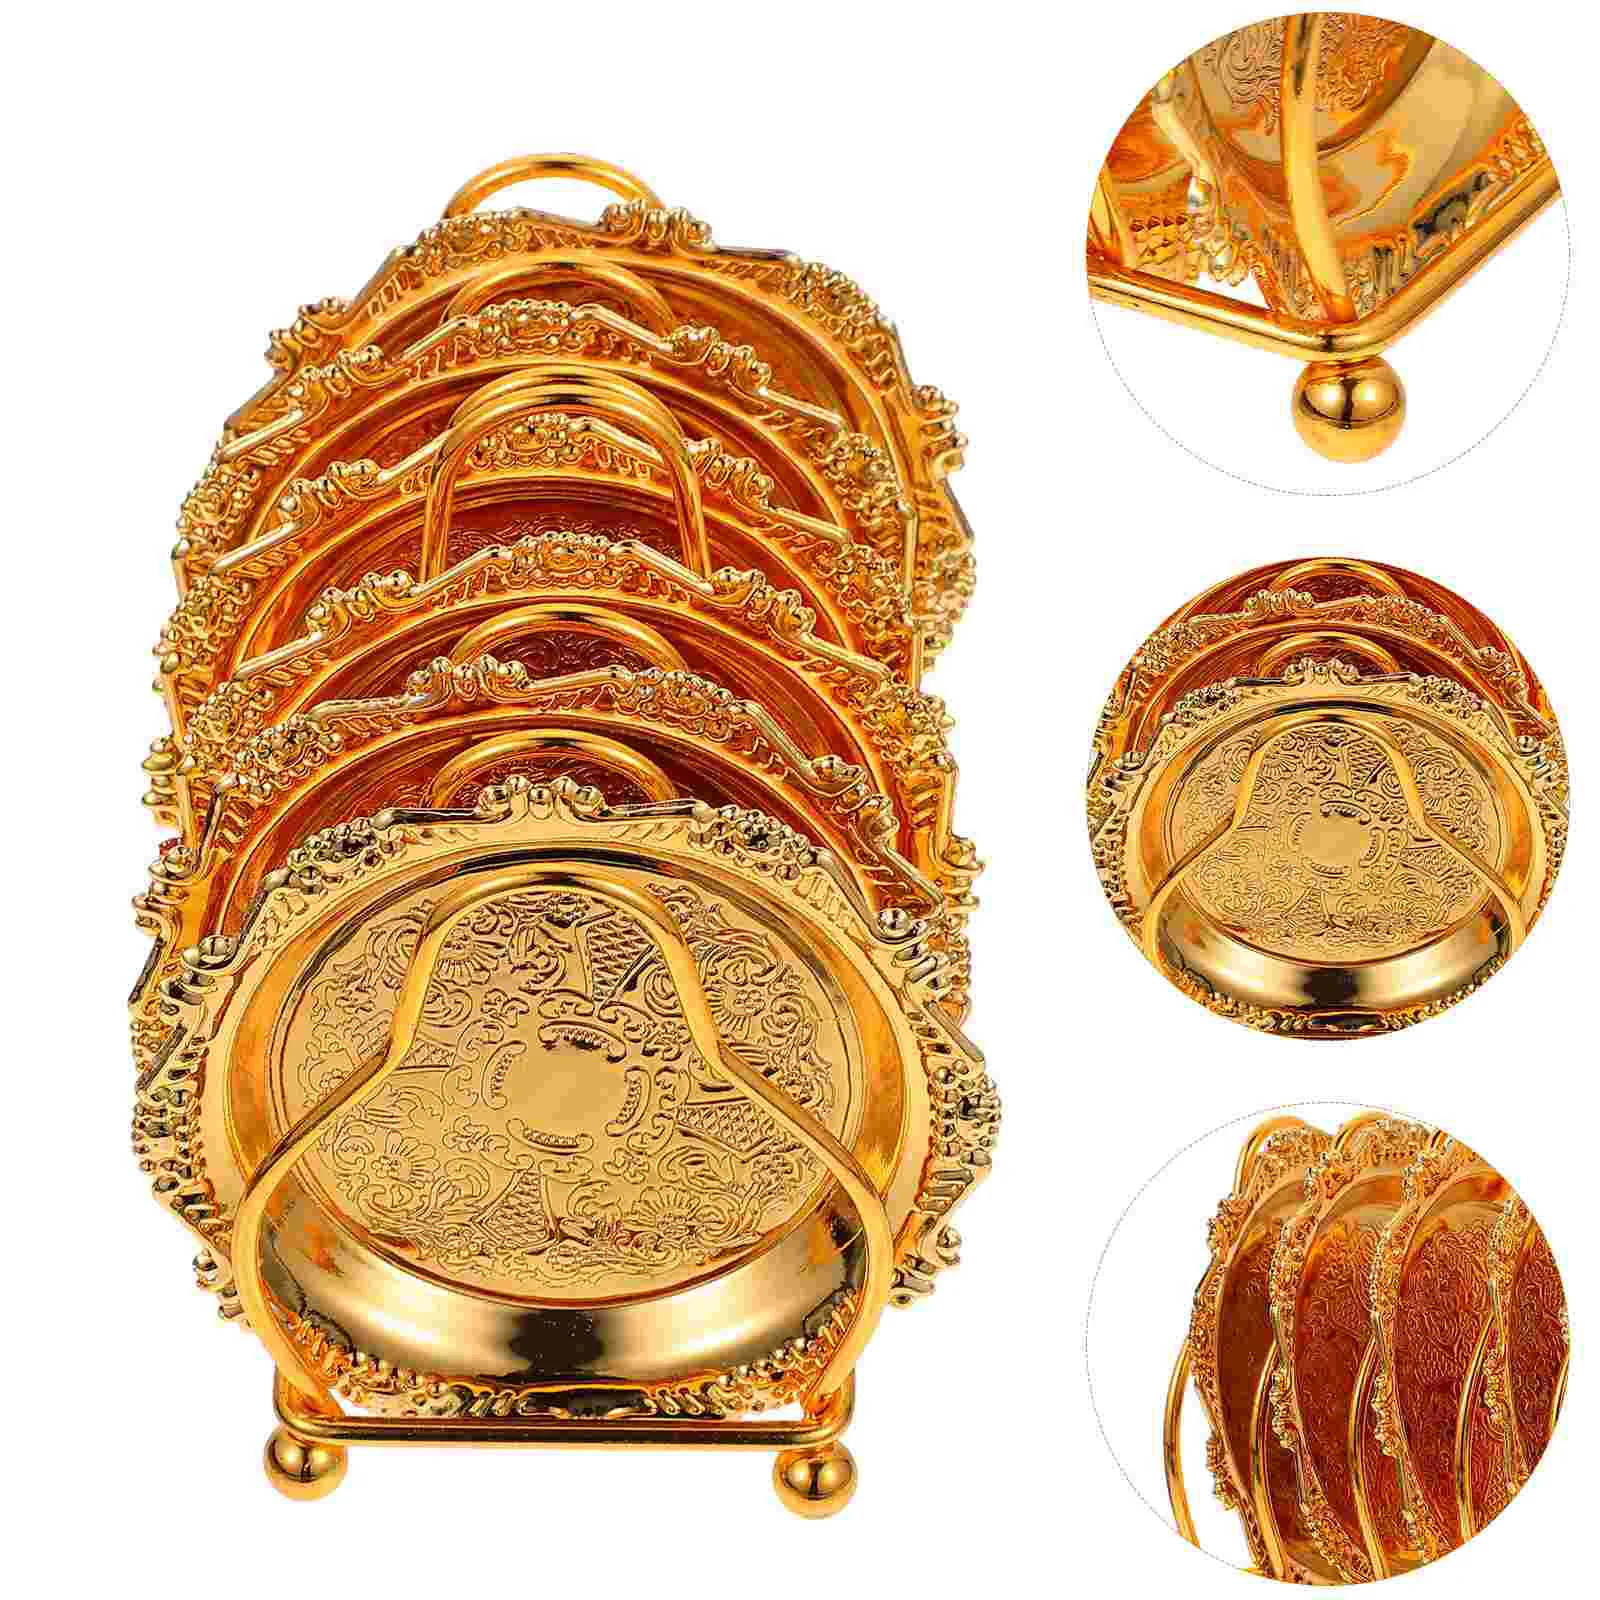 

1 Set Golden Serving Dish Snack Platter With Drying Rack Fruit Tray Dinner Plate Tableware Organizer Bowl Decorative trays